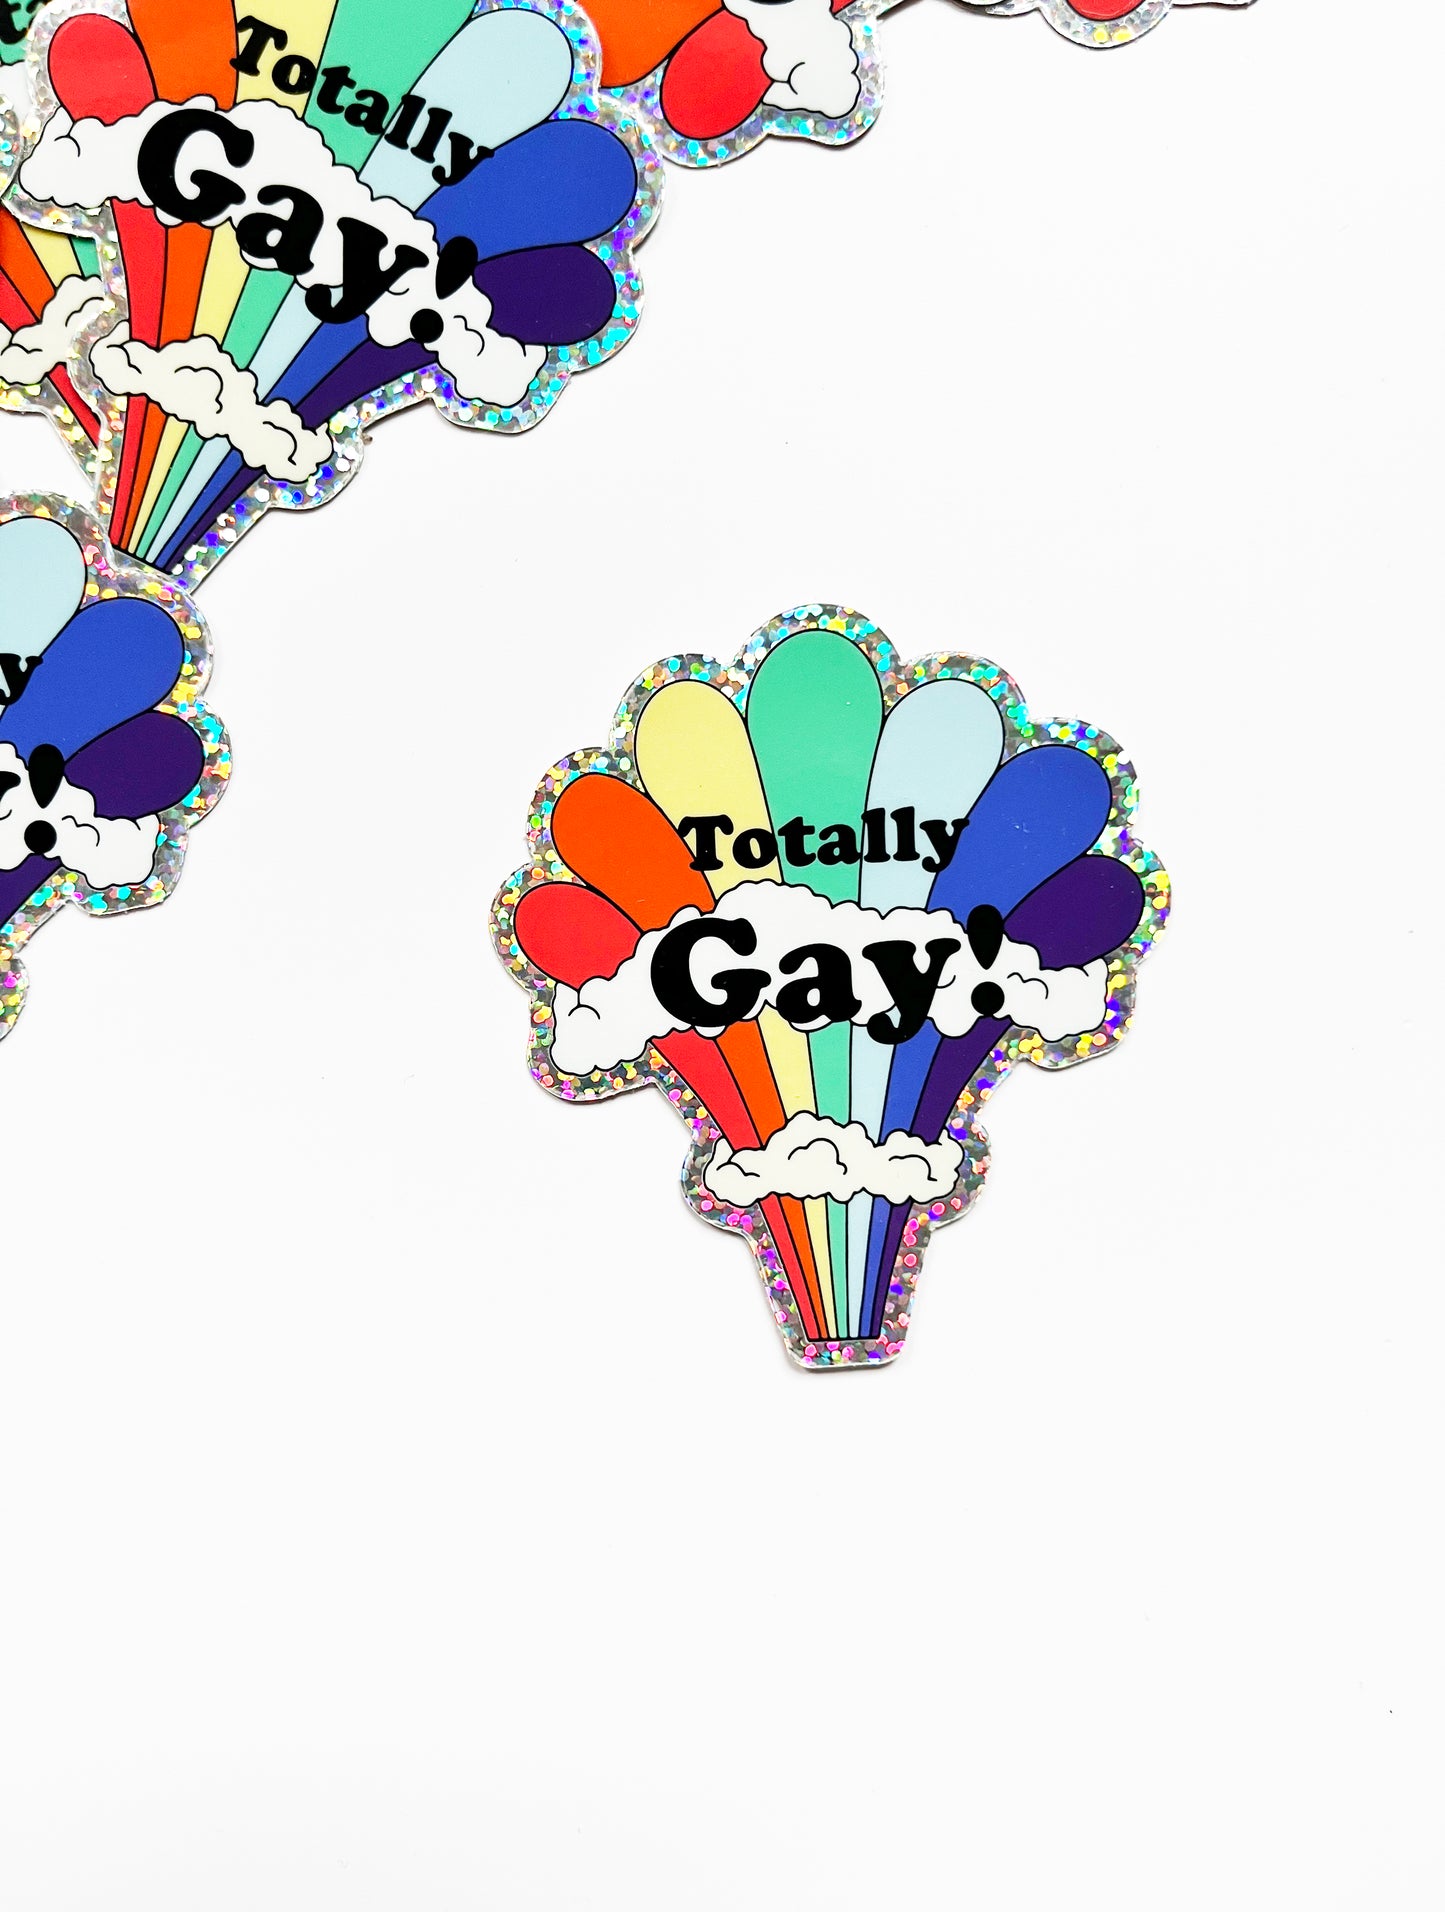 cute totally gay rainbow glitter sticker rainbow and clouds funny sticker totally gay lgbtq pride gay pride queer stickers cute stickers coin laundry montana 